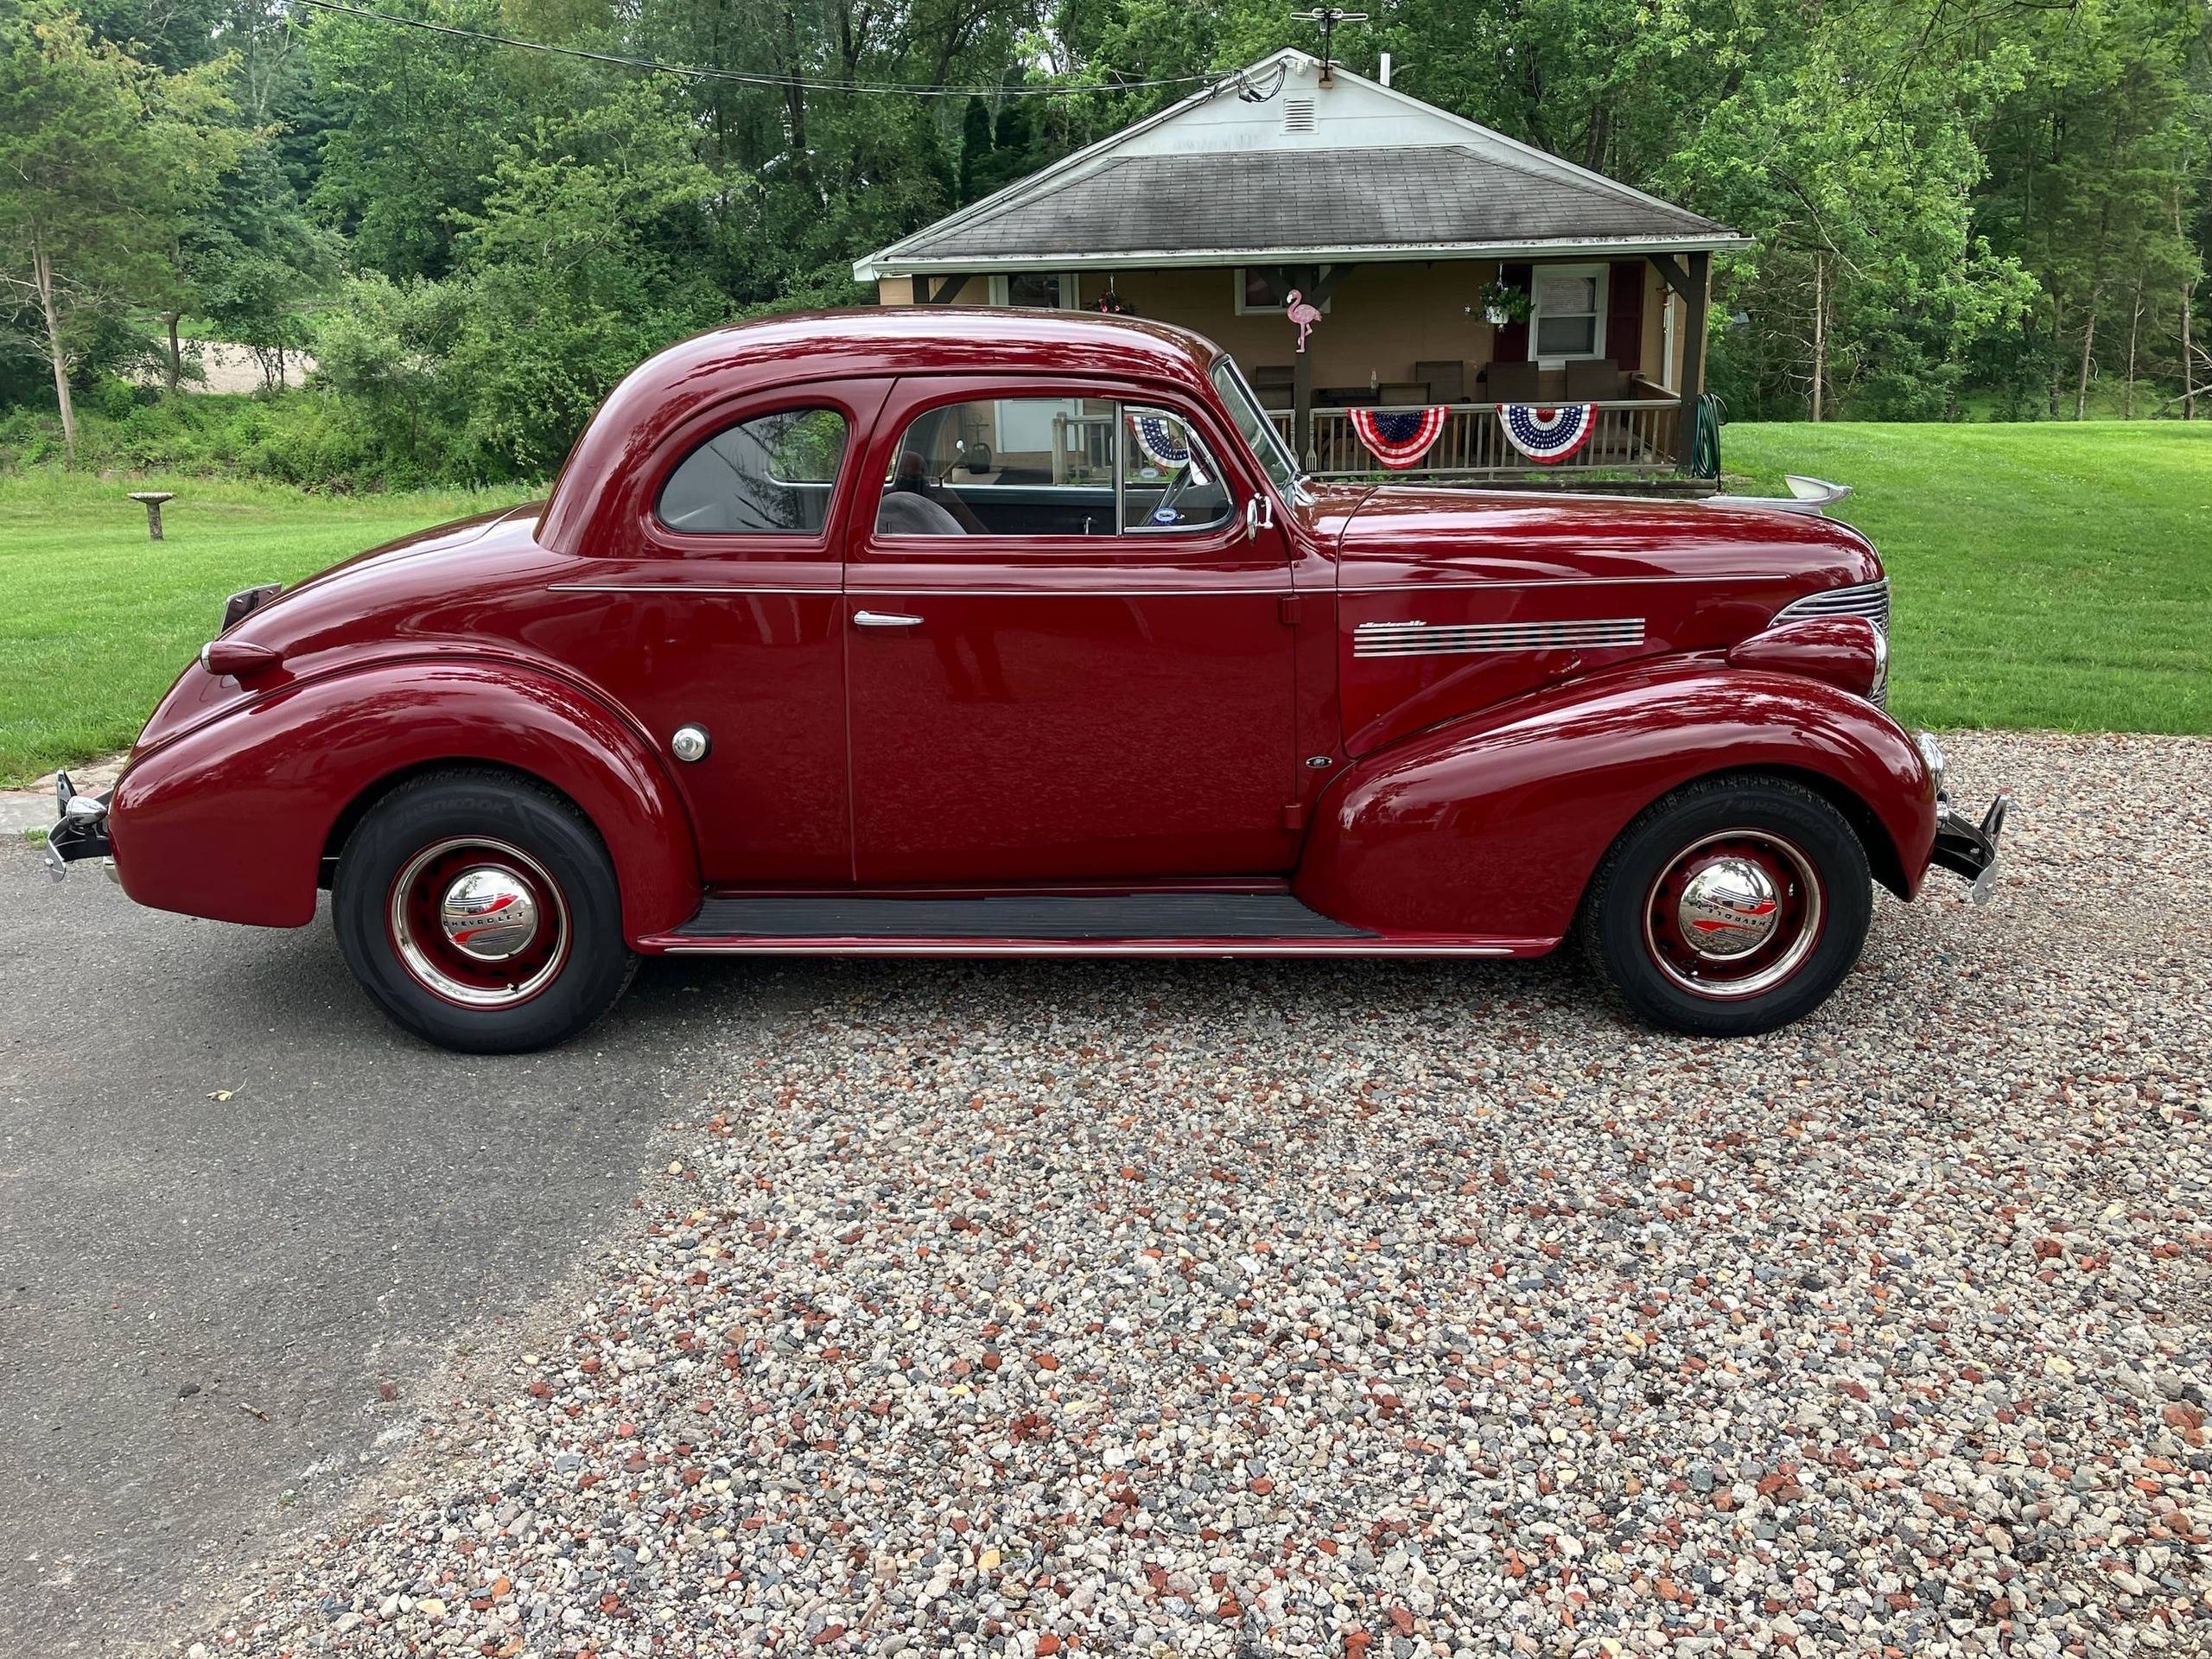 1939 Chevrolet Master 85 business coupe 2